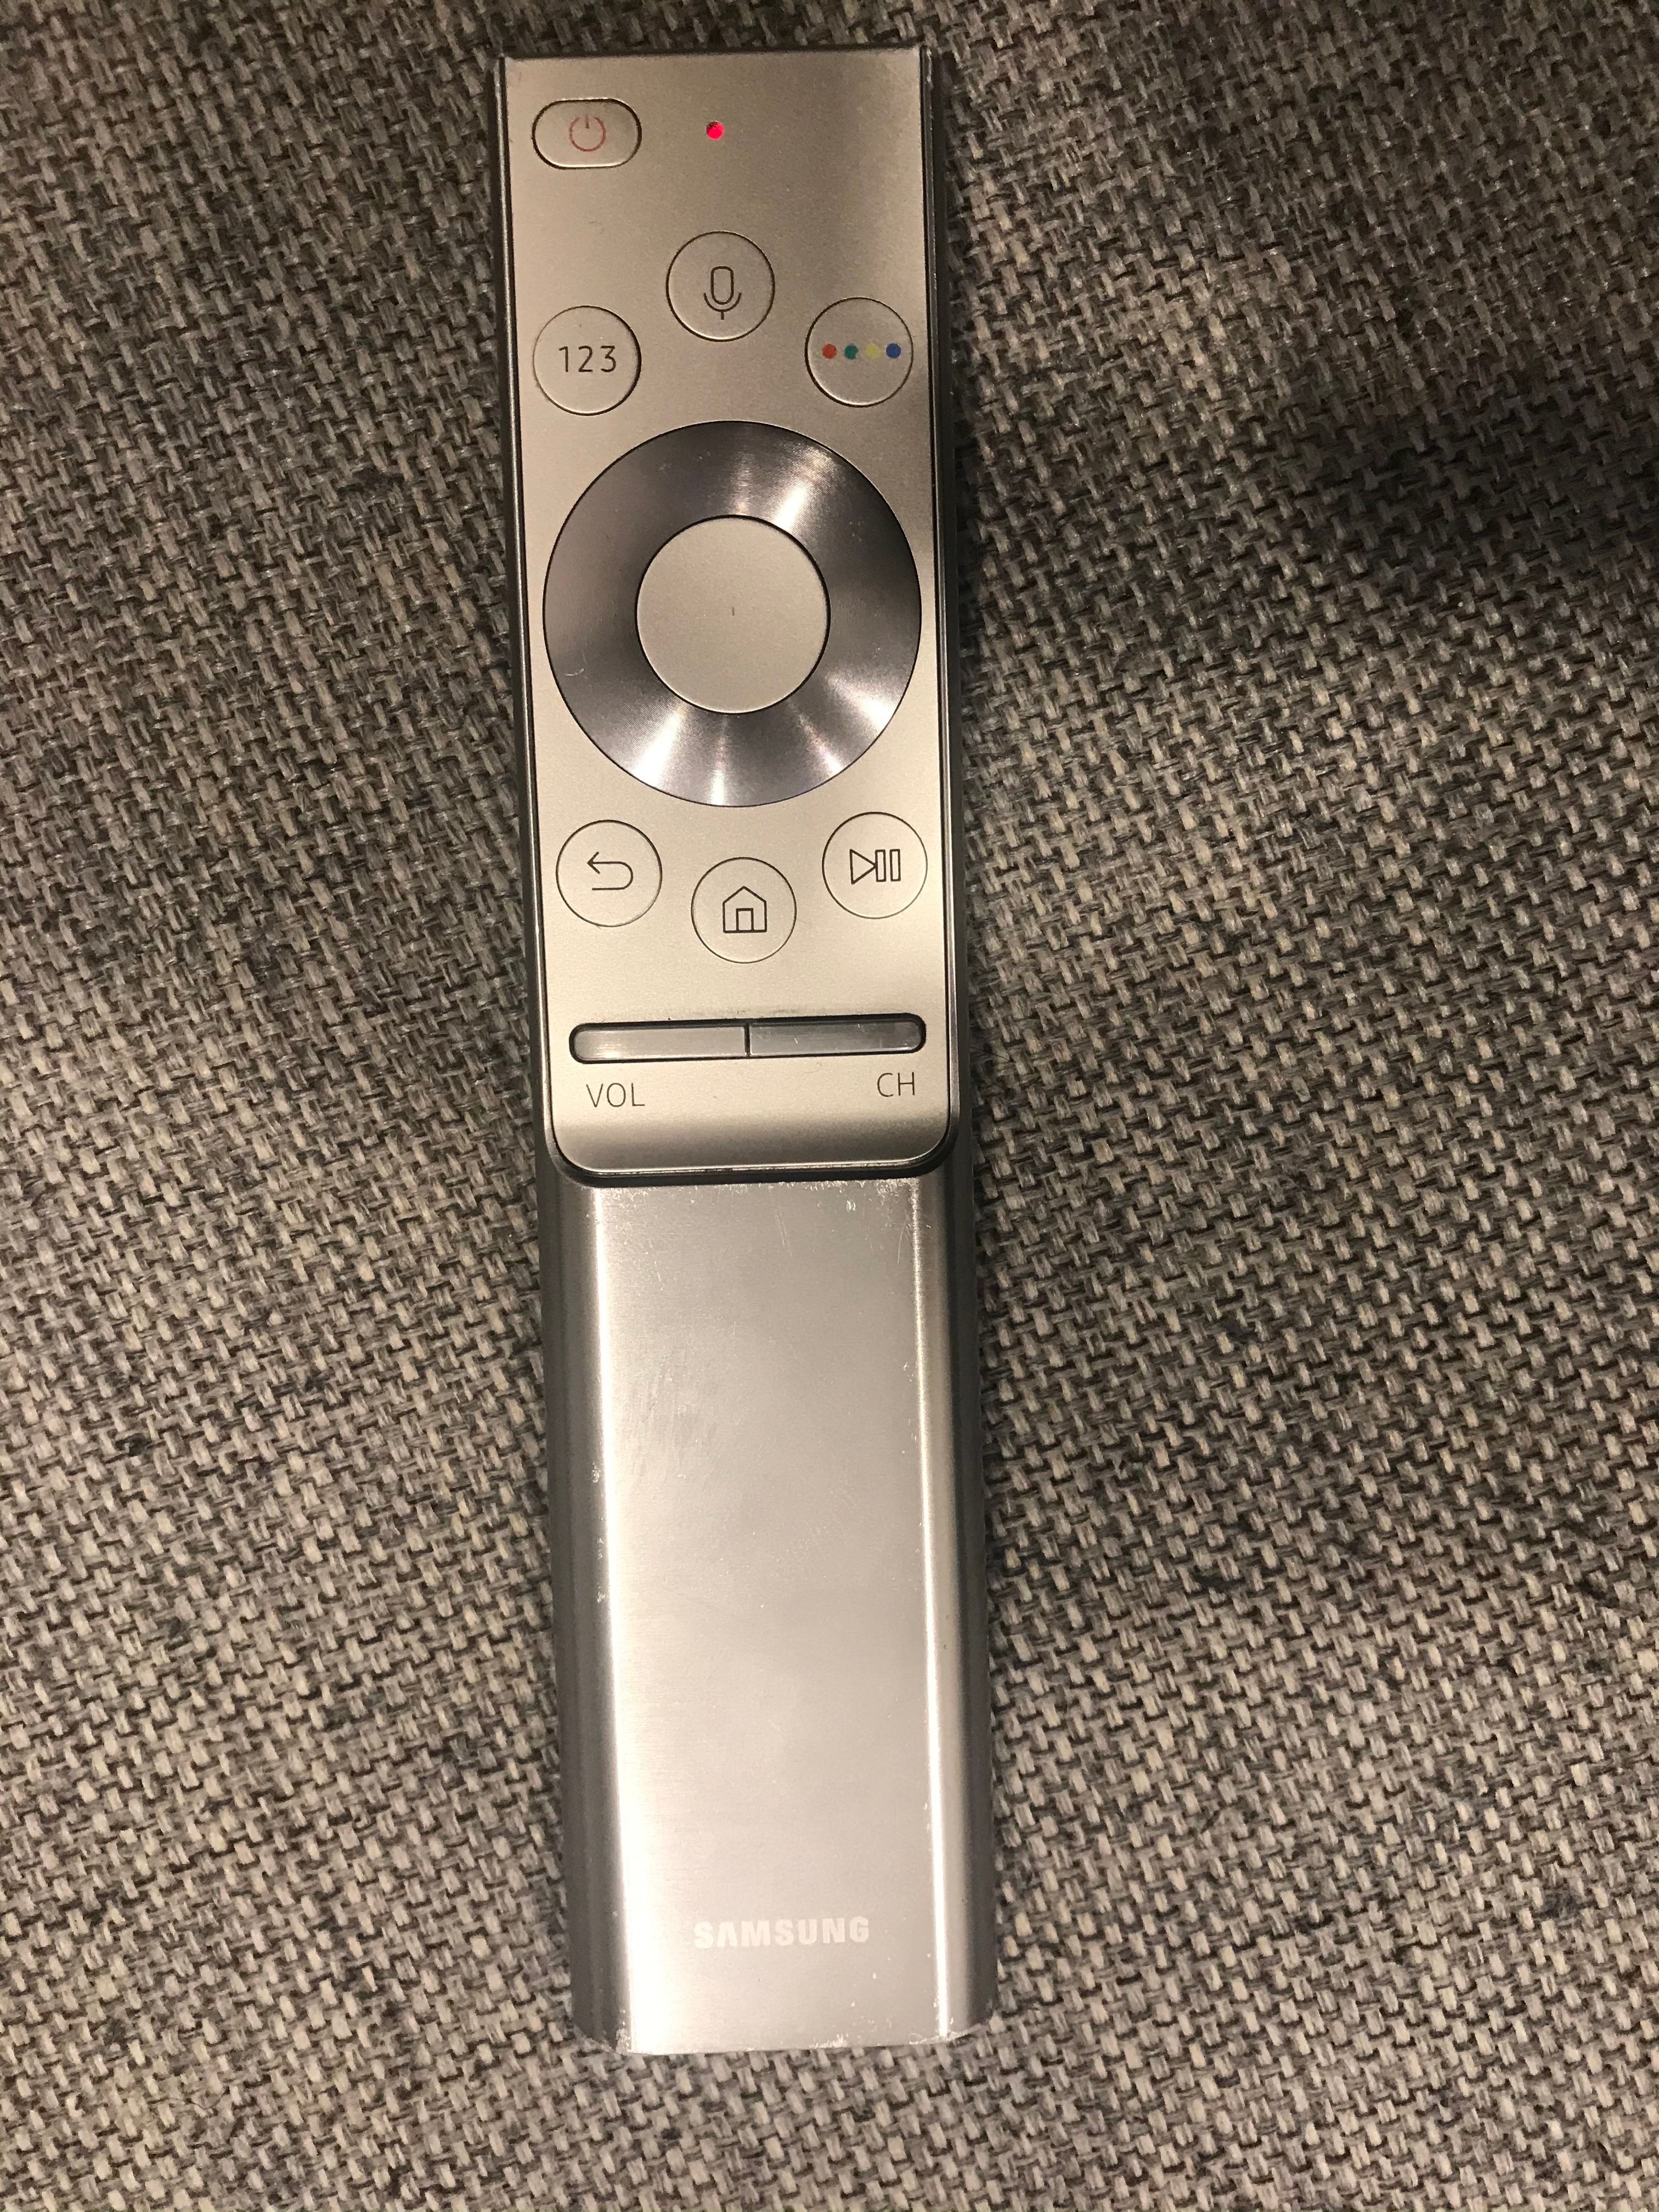 Solved: One remote not working, red light always on - Samsung Community